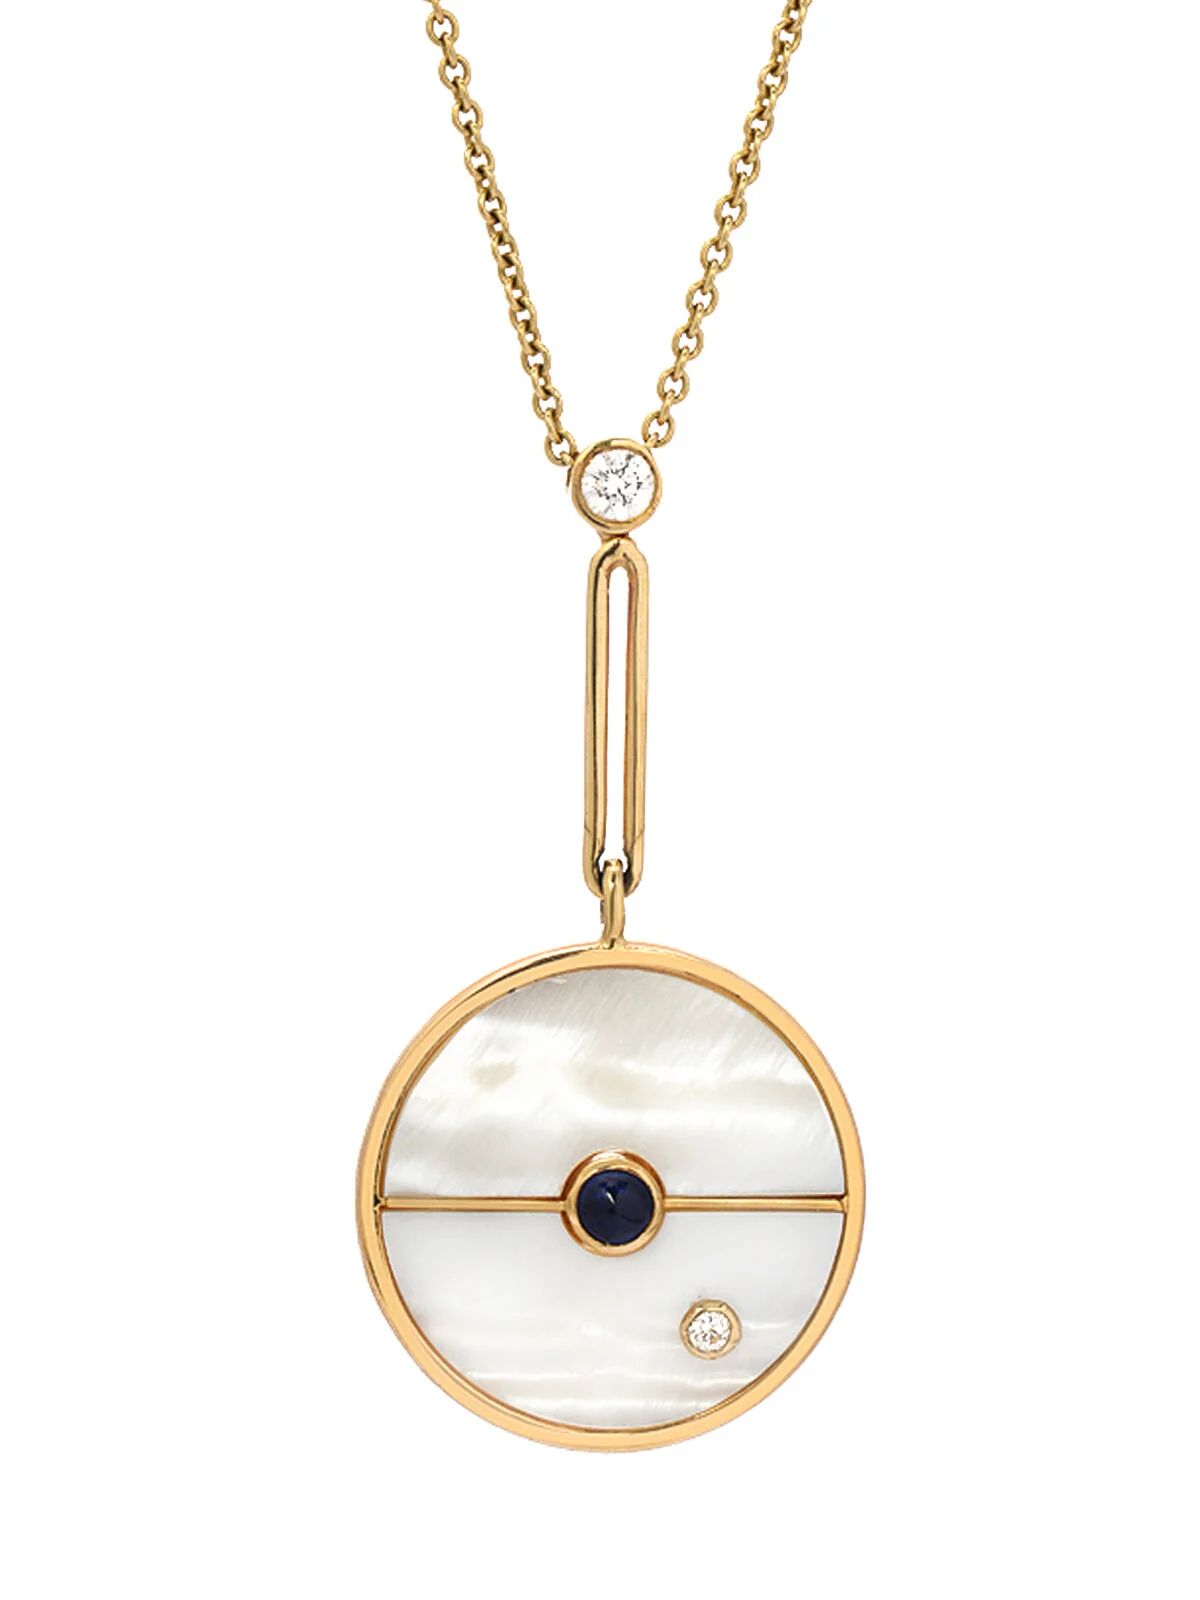 Signature White Mother of Pearl & Blue Sapphire Compass Yellow Gold Necklace | YLANG 23